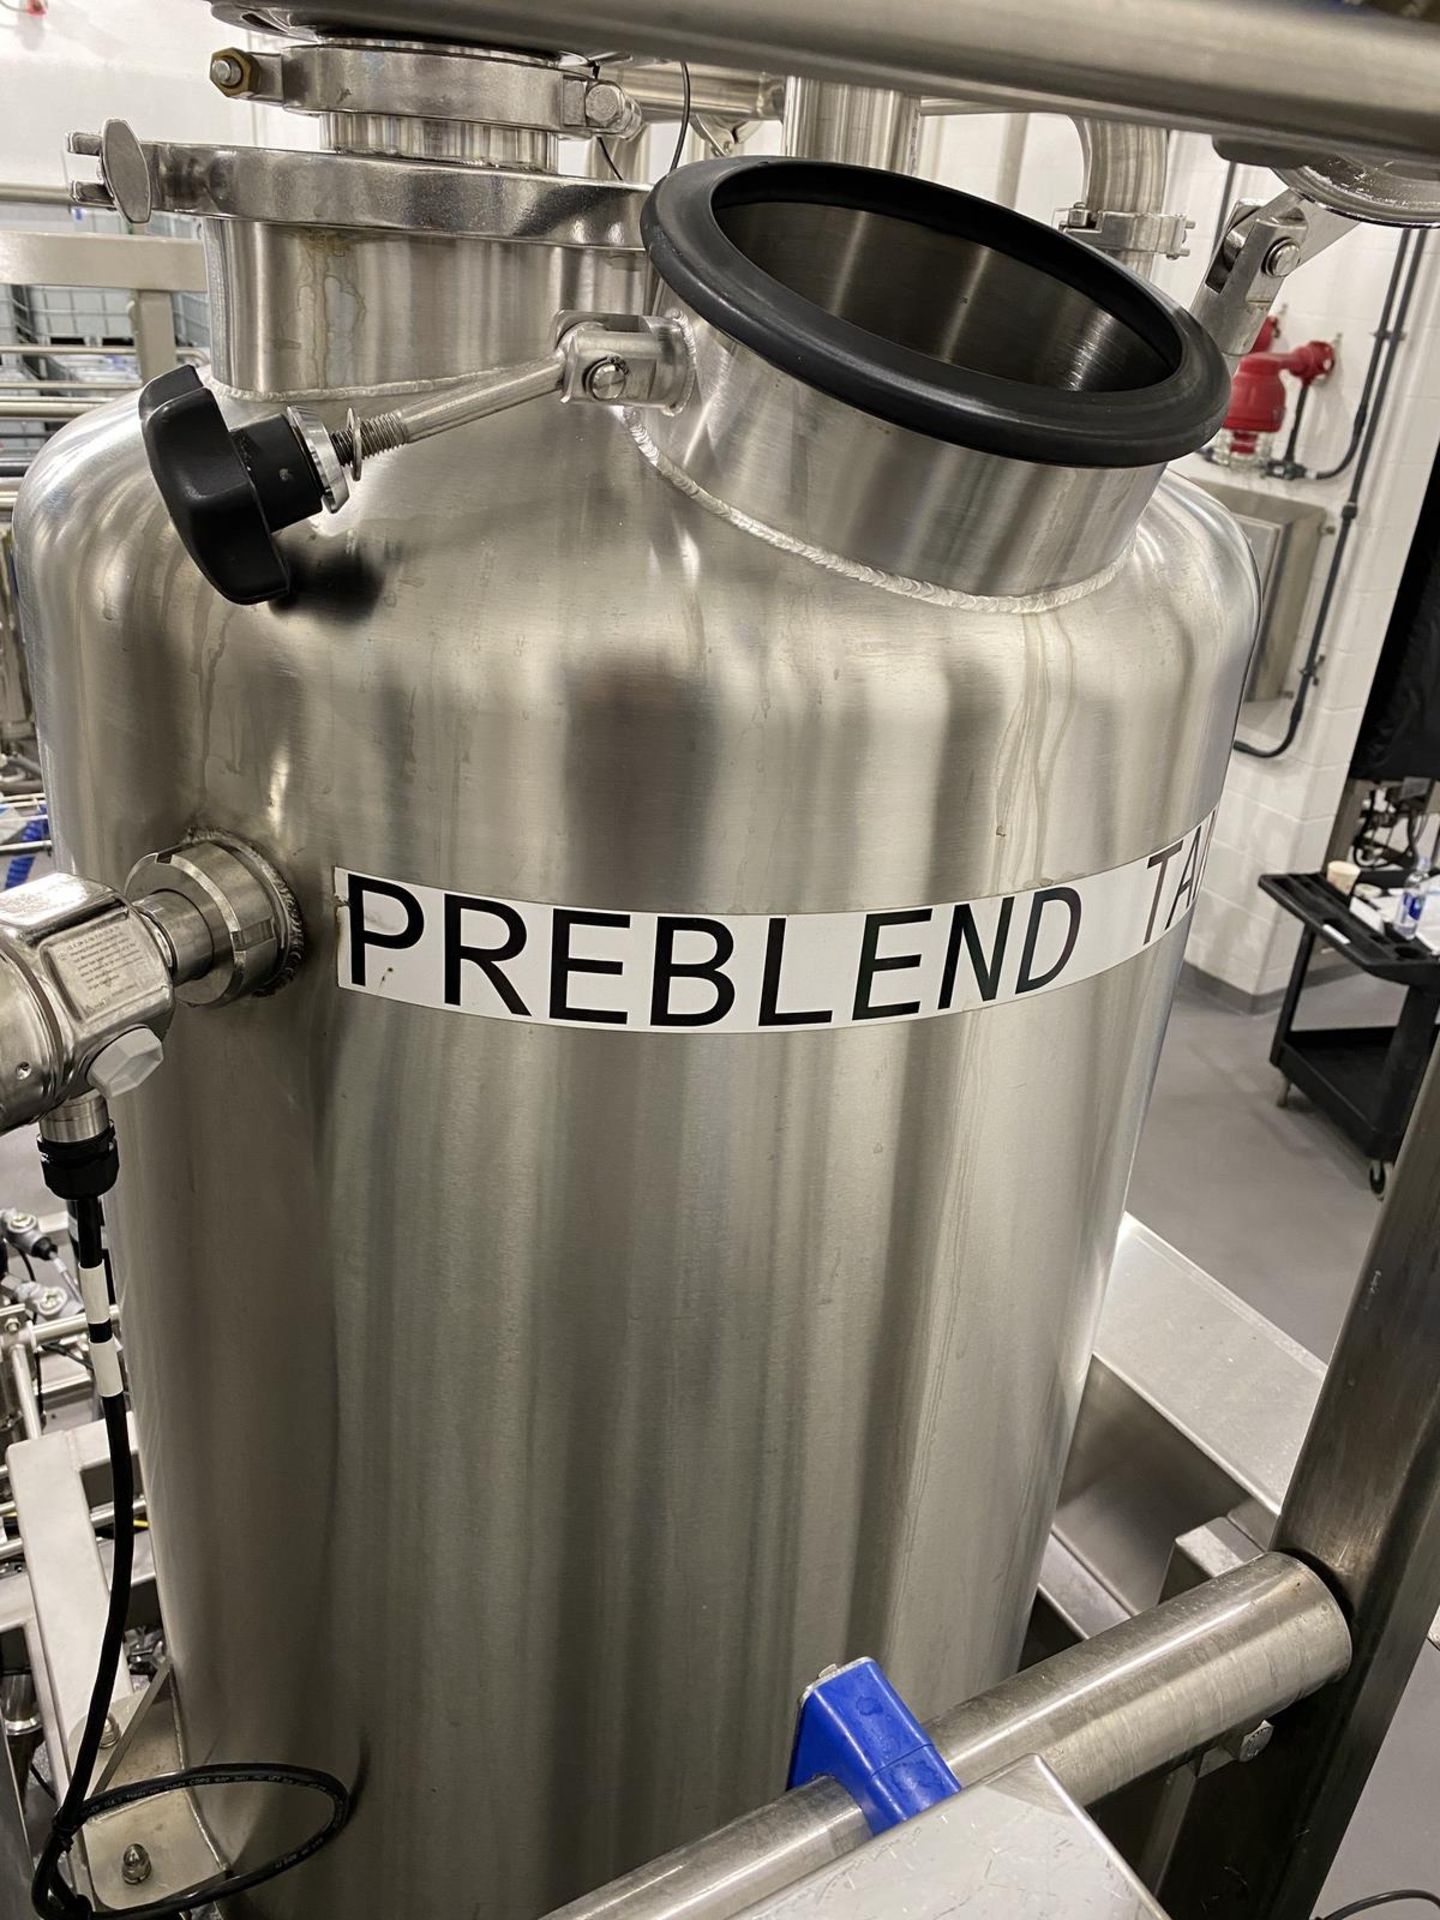 2019 Techniblend Model TB-800 Stainless Steel 316L 6-Input Blending (Dwgs in Photos) | Rig Fee: 2000 - Image 8 of 77